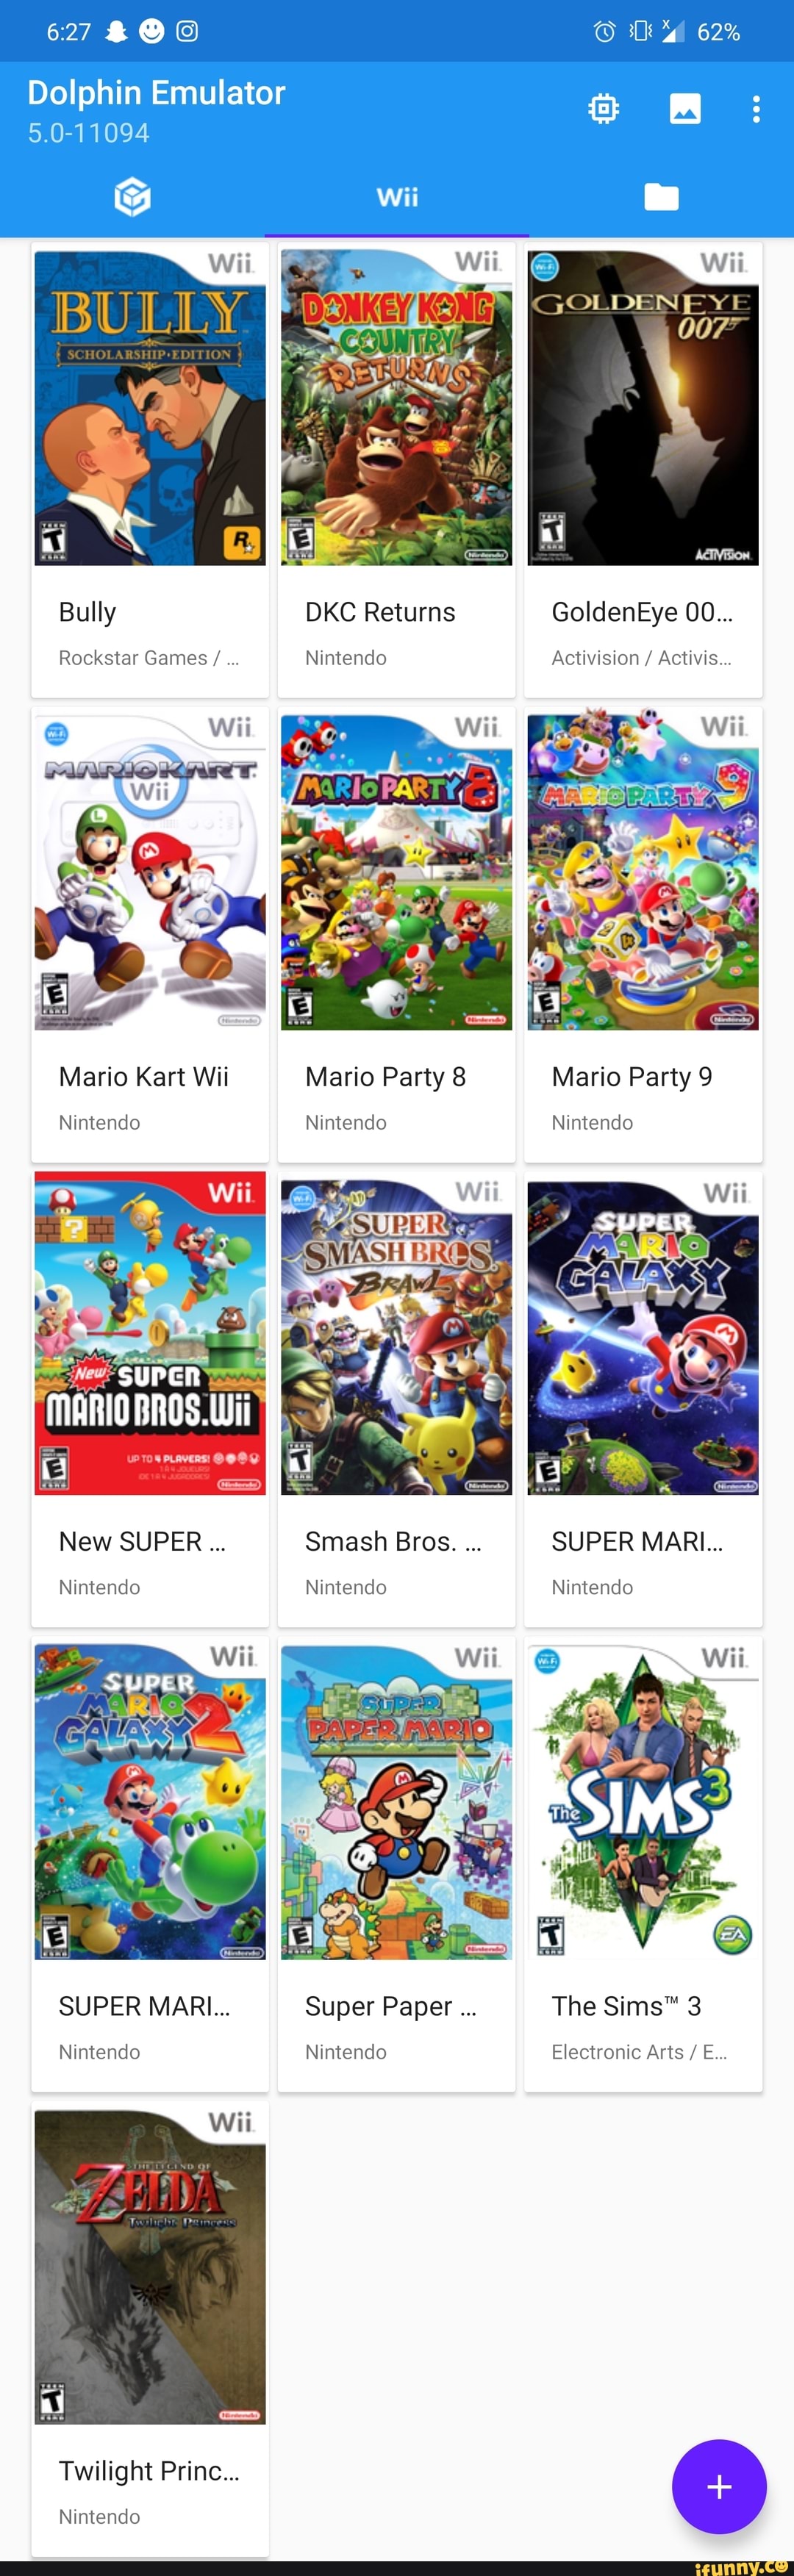 mario kart wii dolphin emulator with ps4 controller